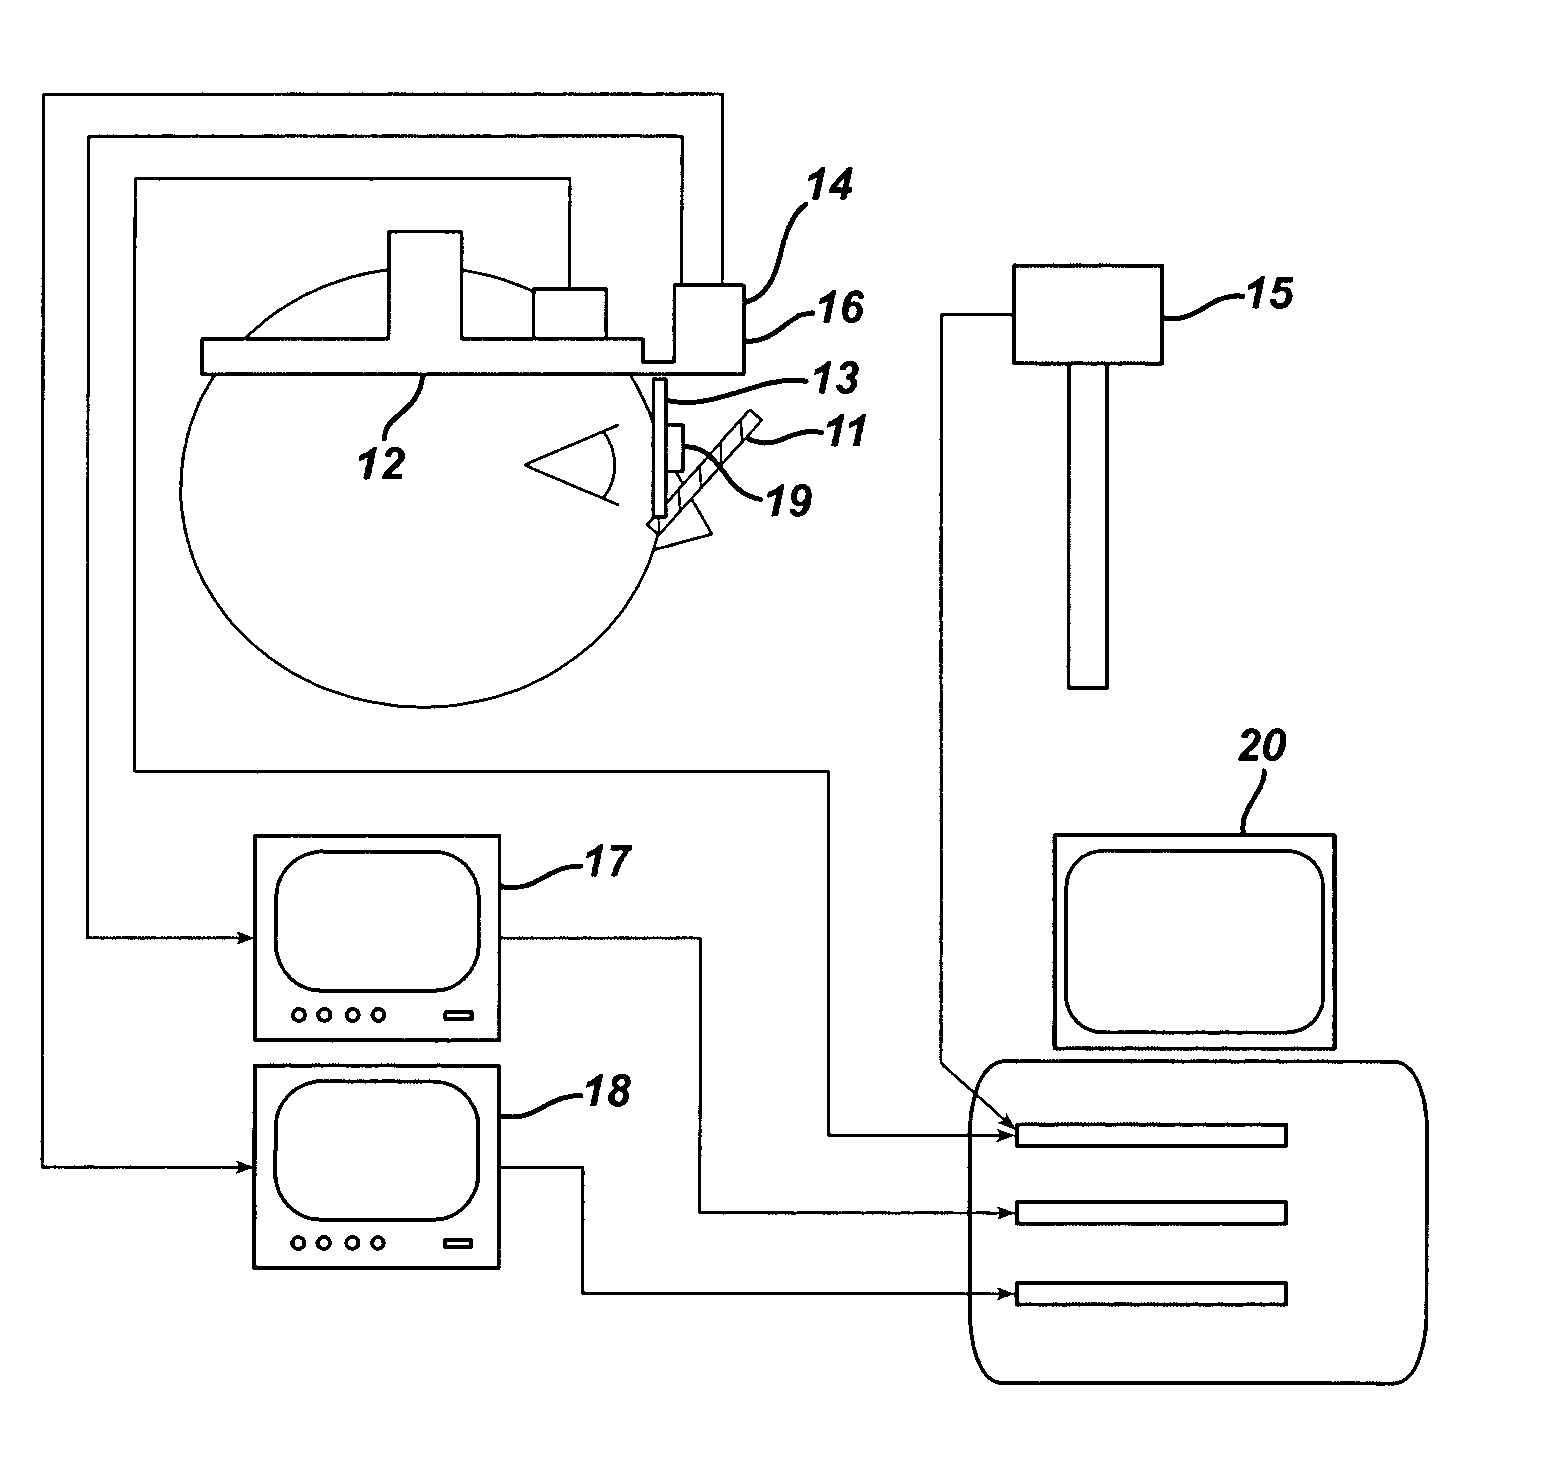 Method for designing spectacle lenses taking into account an individual's head and eye movement